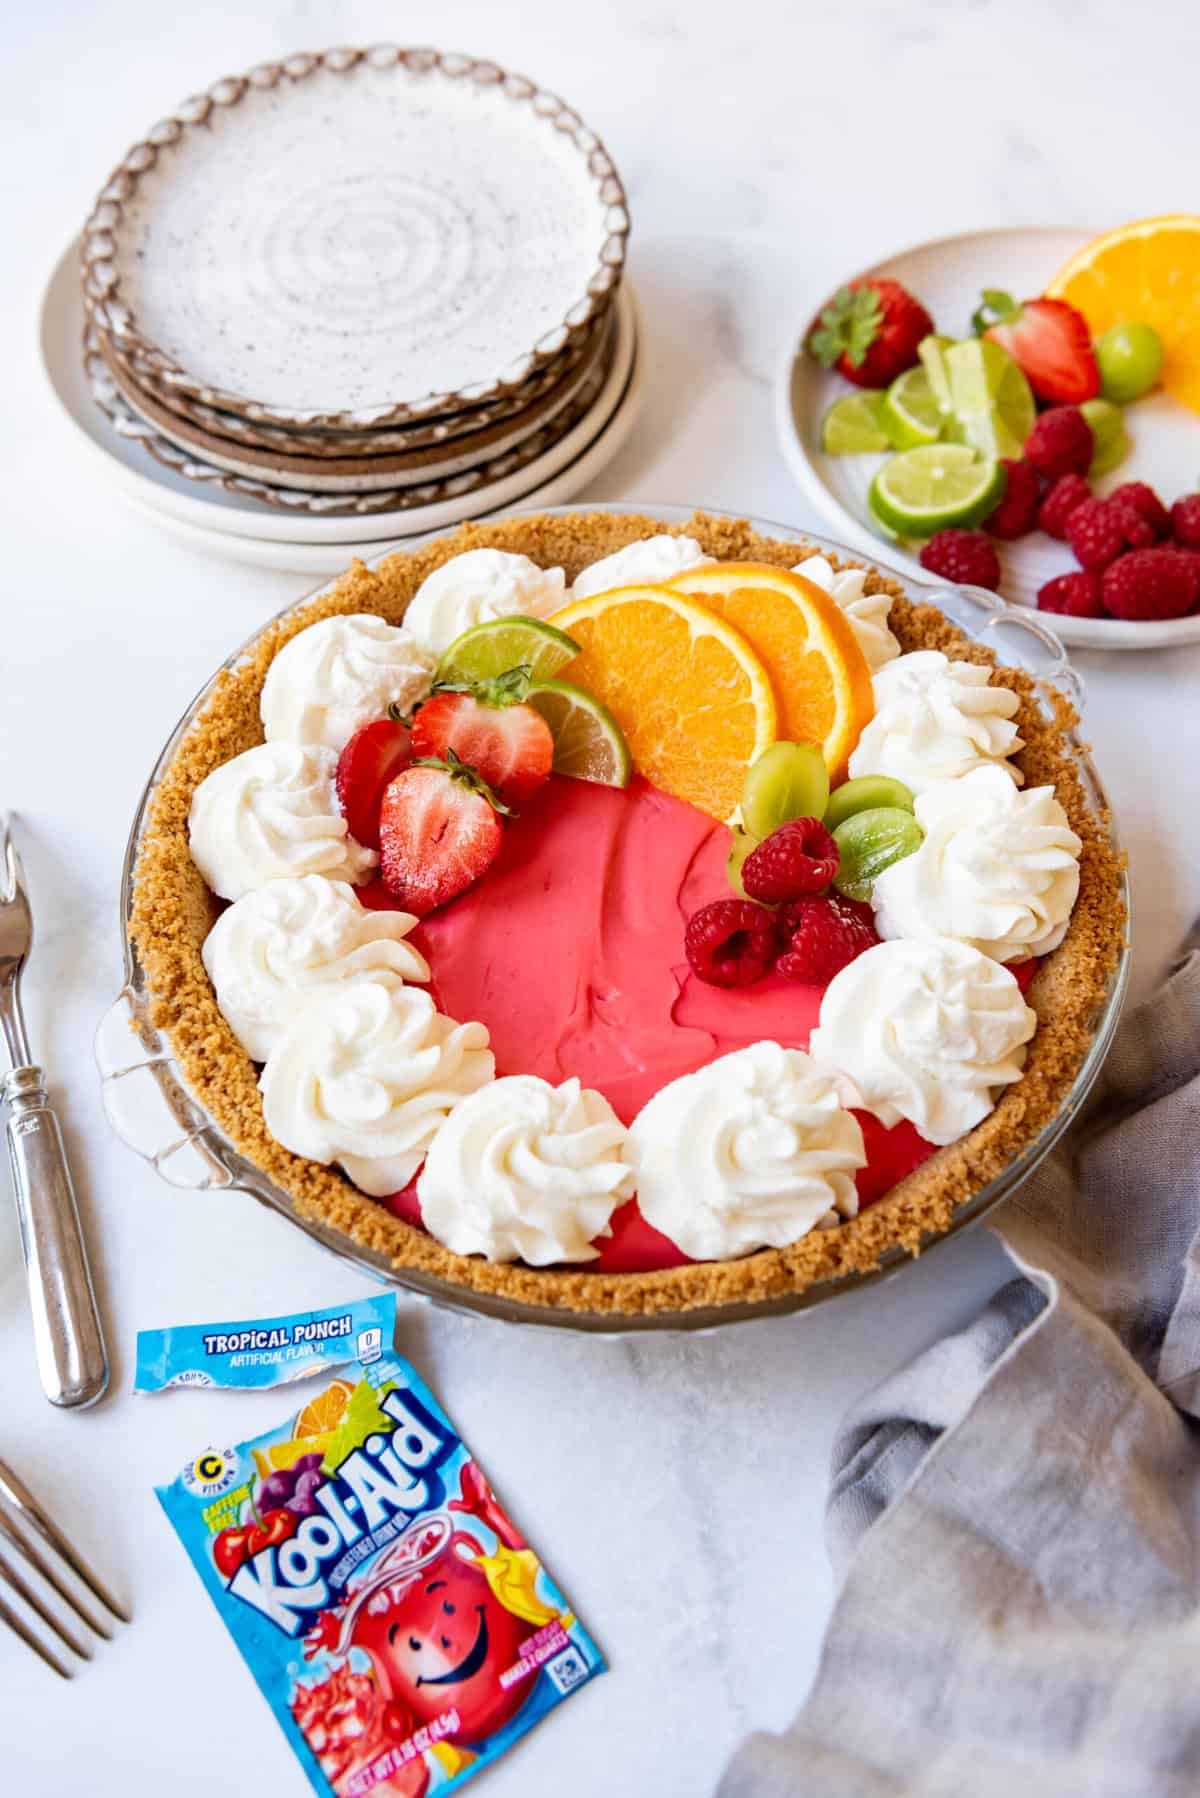 A tropical punch Kool-Aid pie decorated with whipped cream and fresh fruit.